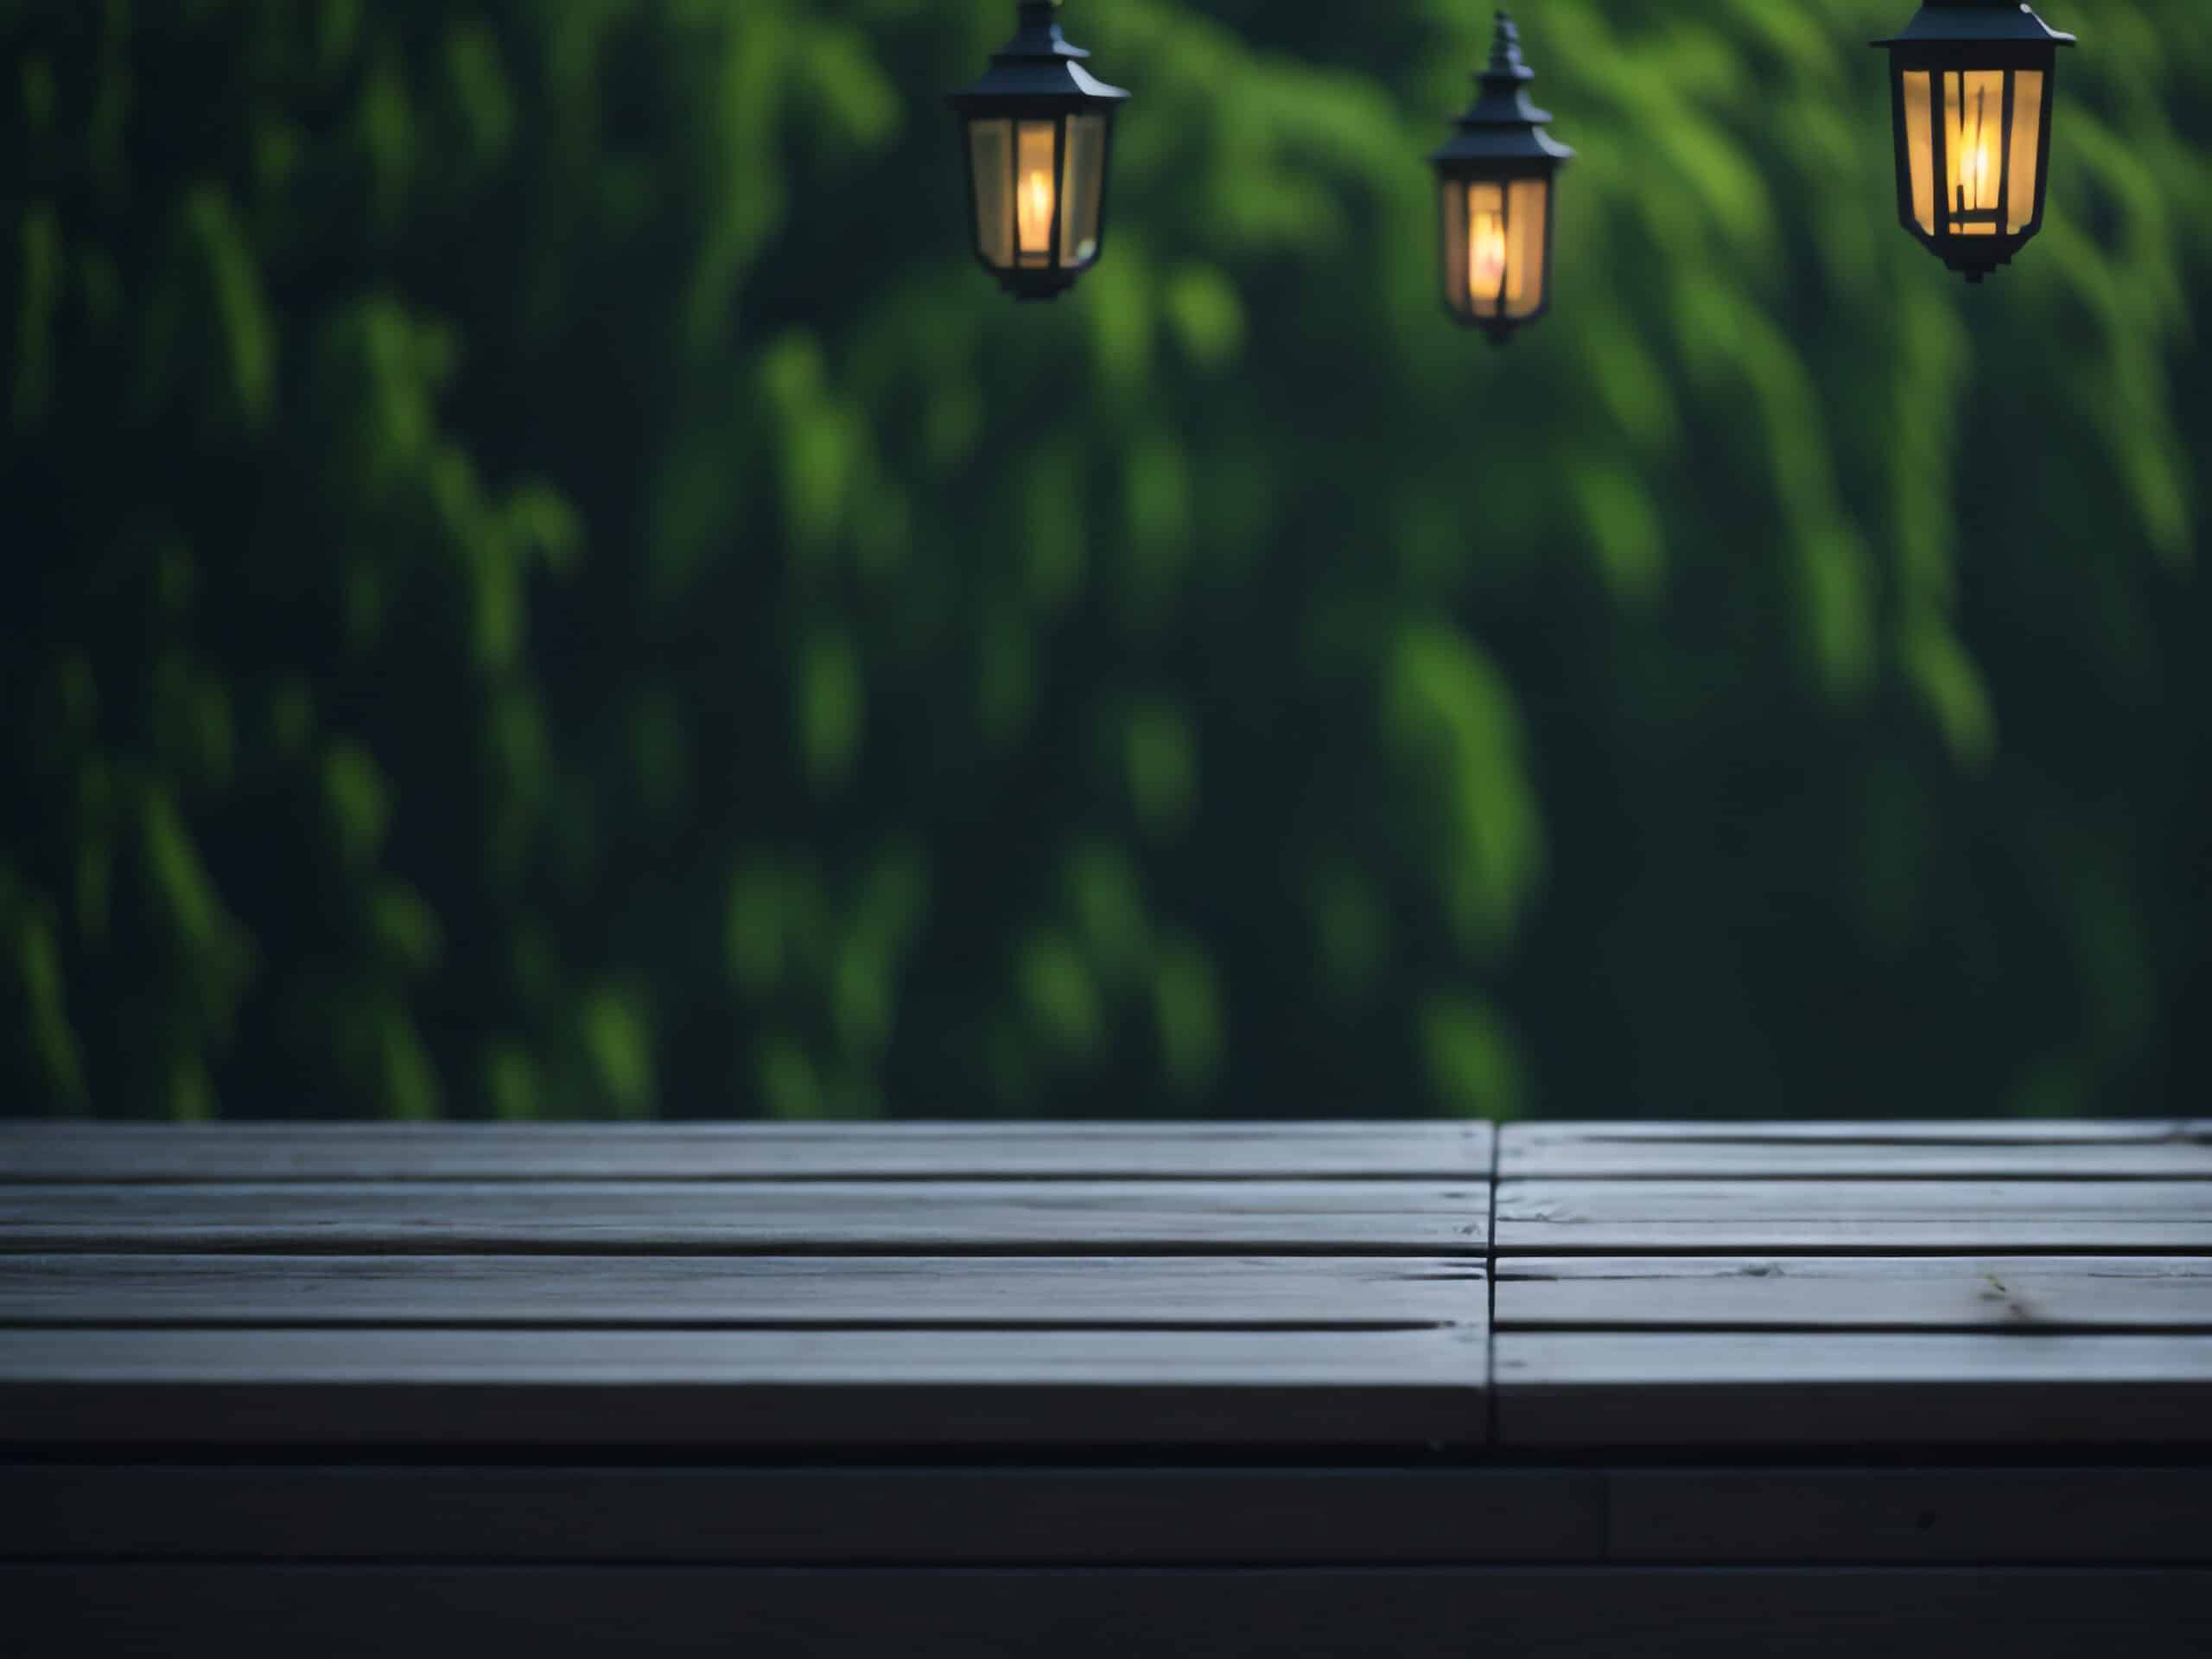 www.appr.com : What's the best way to install outdoor lighting?